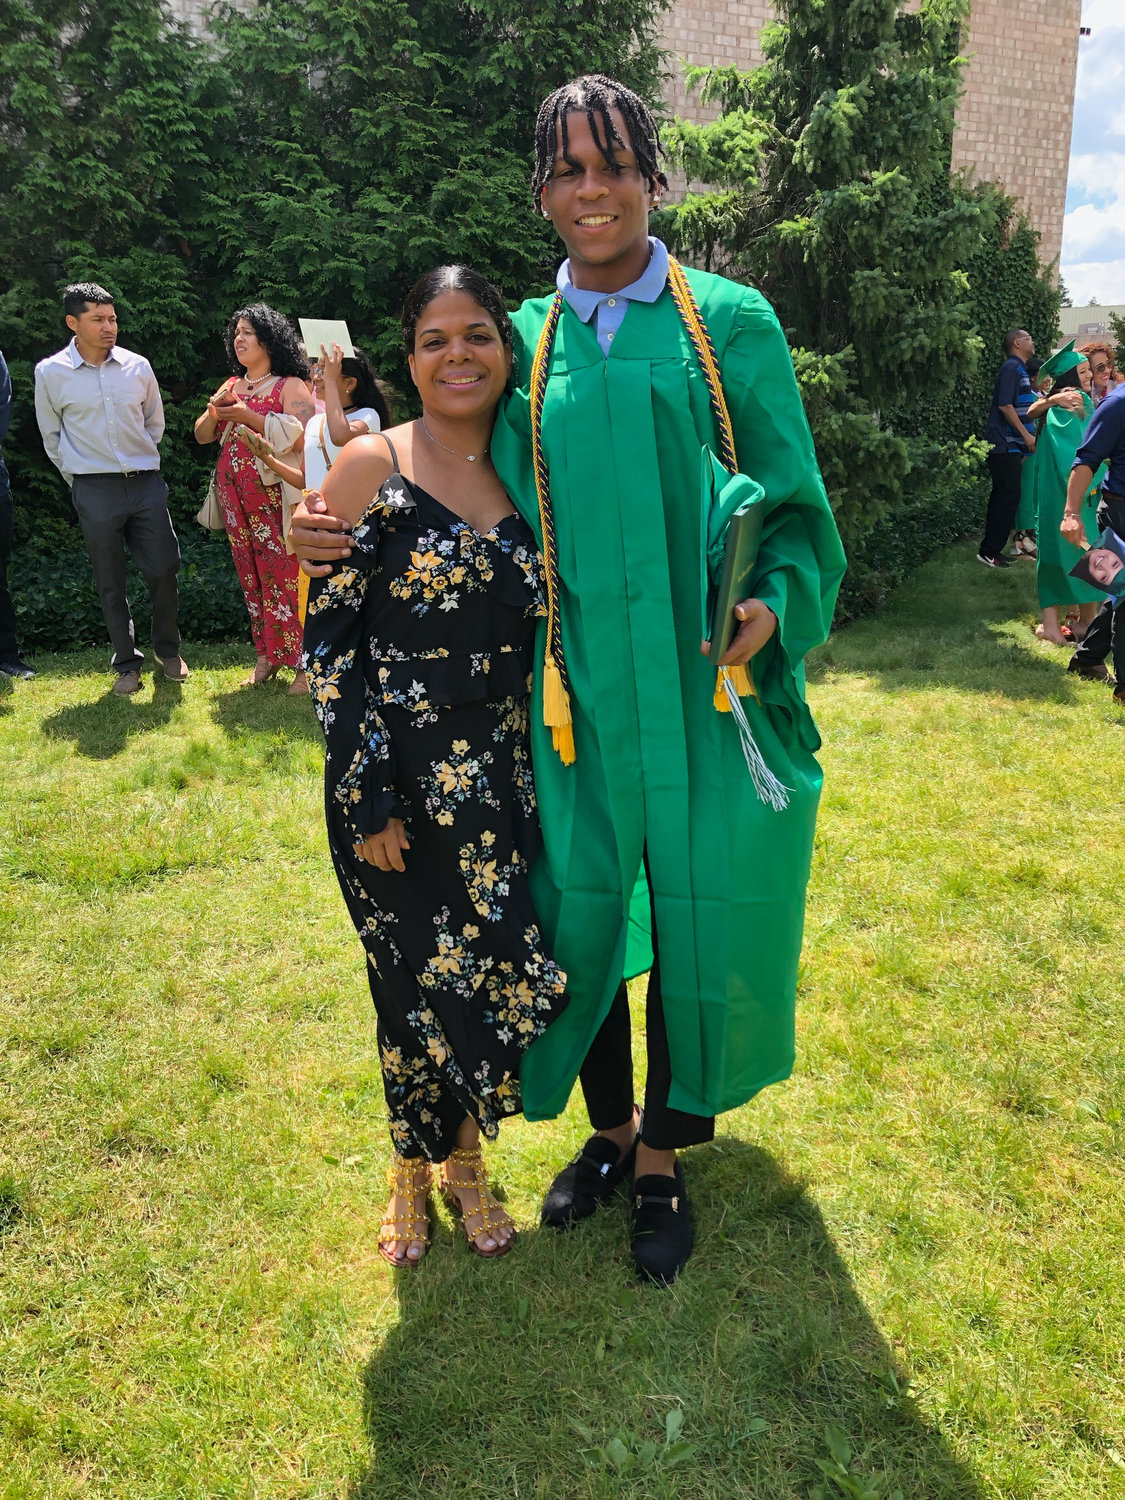 Phillips was with her son, and Central High School graduate Solomon Richards, 18, each time he went to the hospital for his sickle cell anemia.